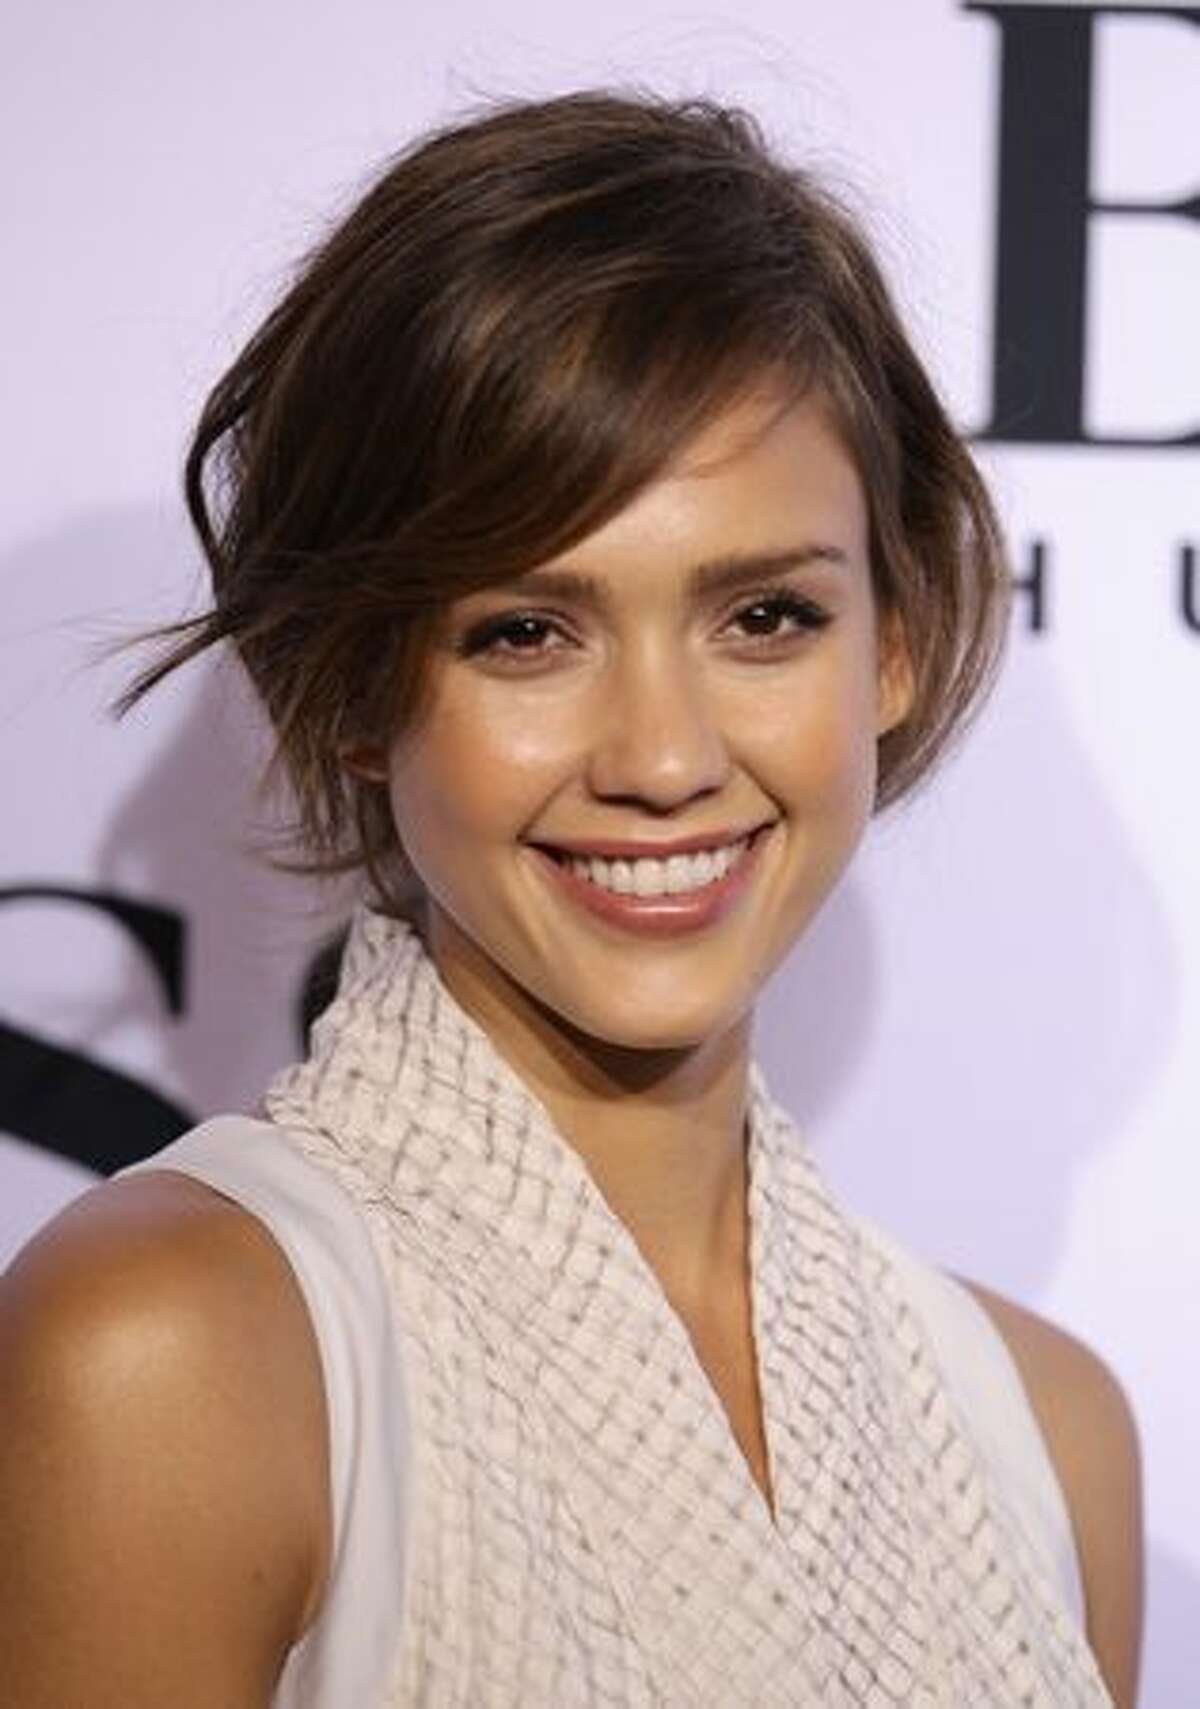 Actress Jessica Alba arrives at the Boss Black Show during the Mercedes-Benz Fashion Week Spring/Summer 2011.